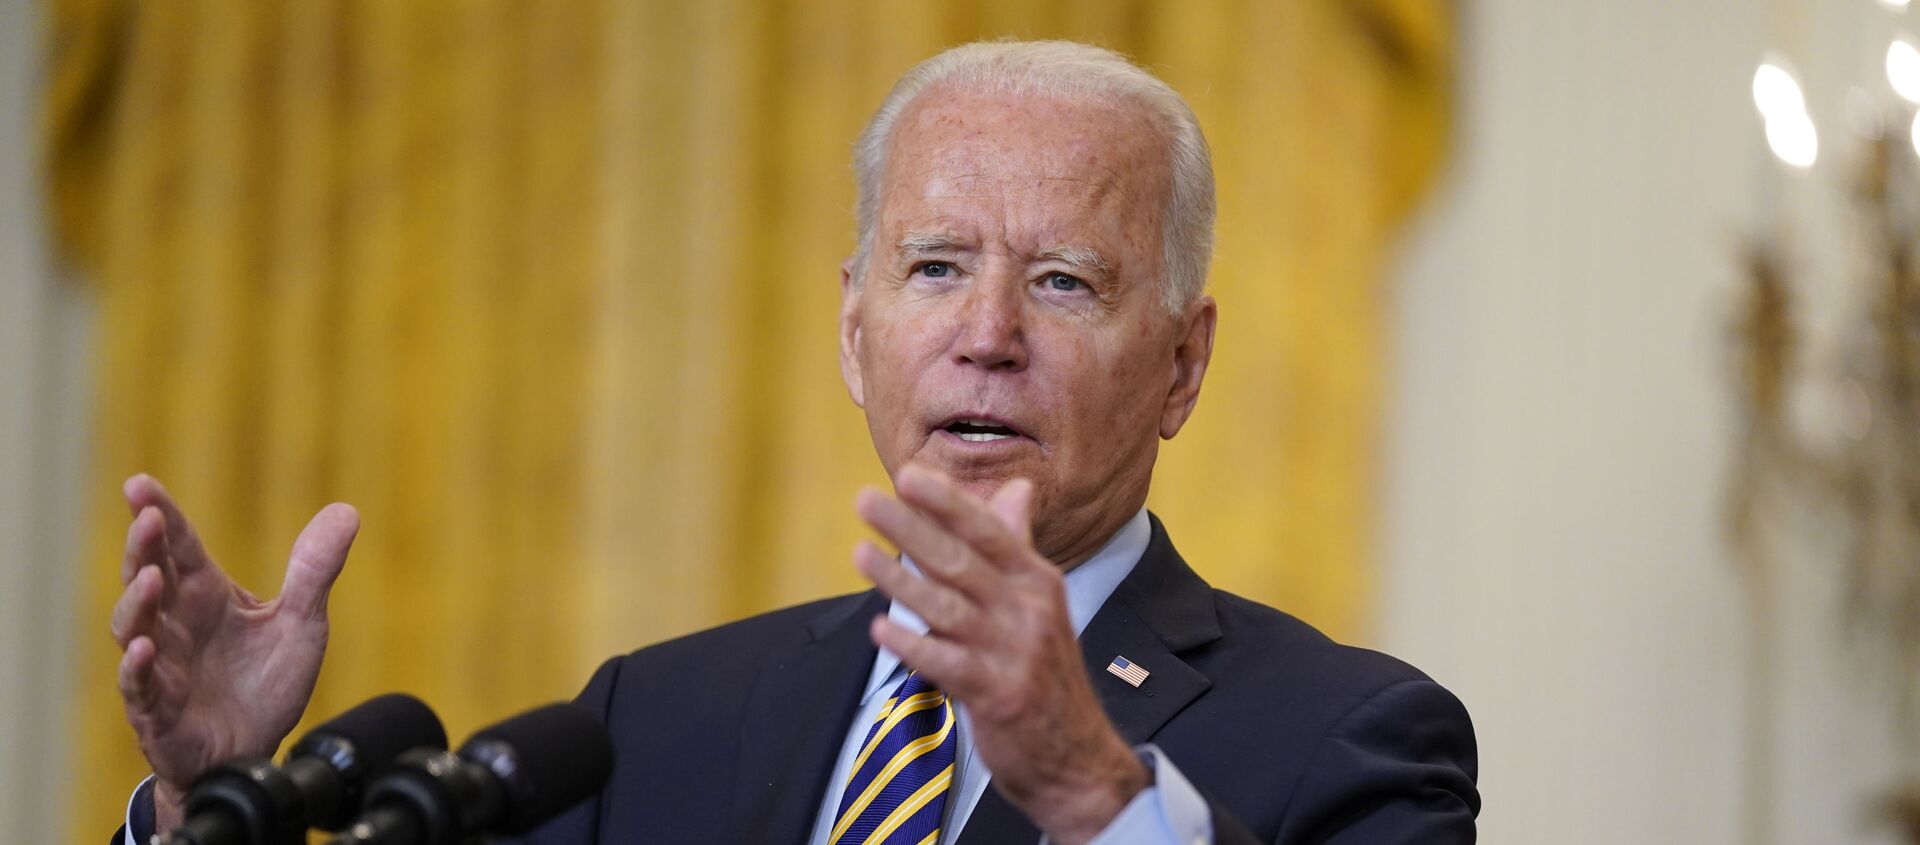 President Joe Biden speaks about the American troop withdrawal from Afghanistan, in the East Room of the White House, Thursday, July 8, 2021, in Washington. - Sputnik International, 1920, 08.07.2021